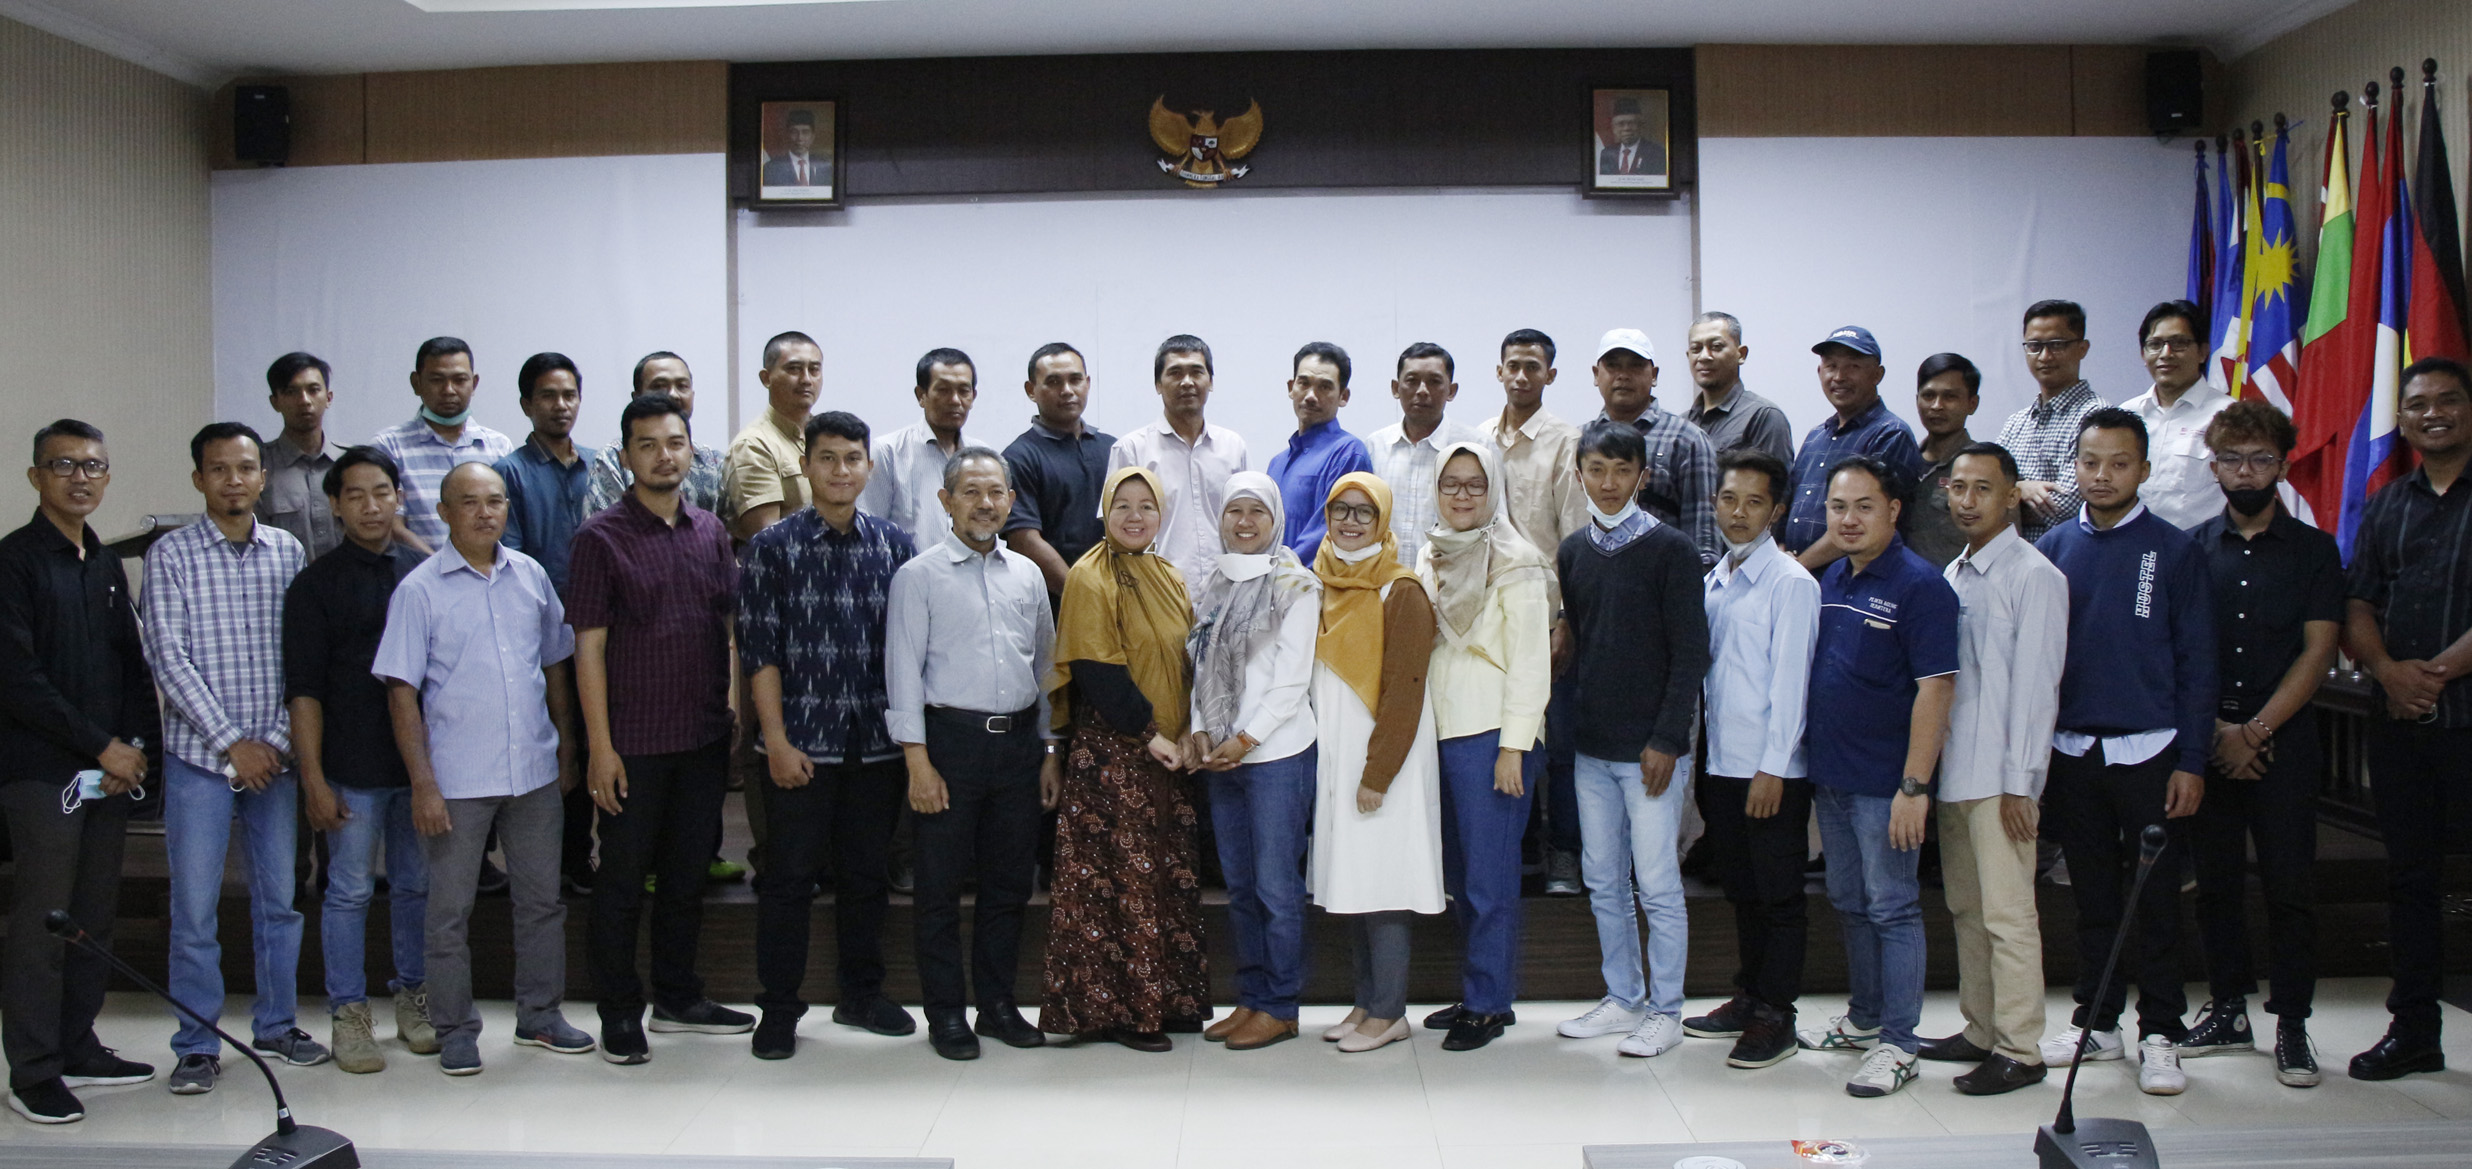 UB Faculty of Animal Science Lecturers Together with PT. Nestle Indonesia Provides Training on Frozen Semen Quality Test